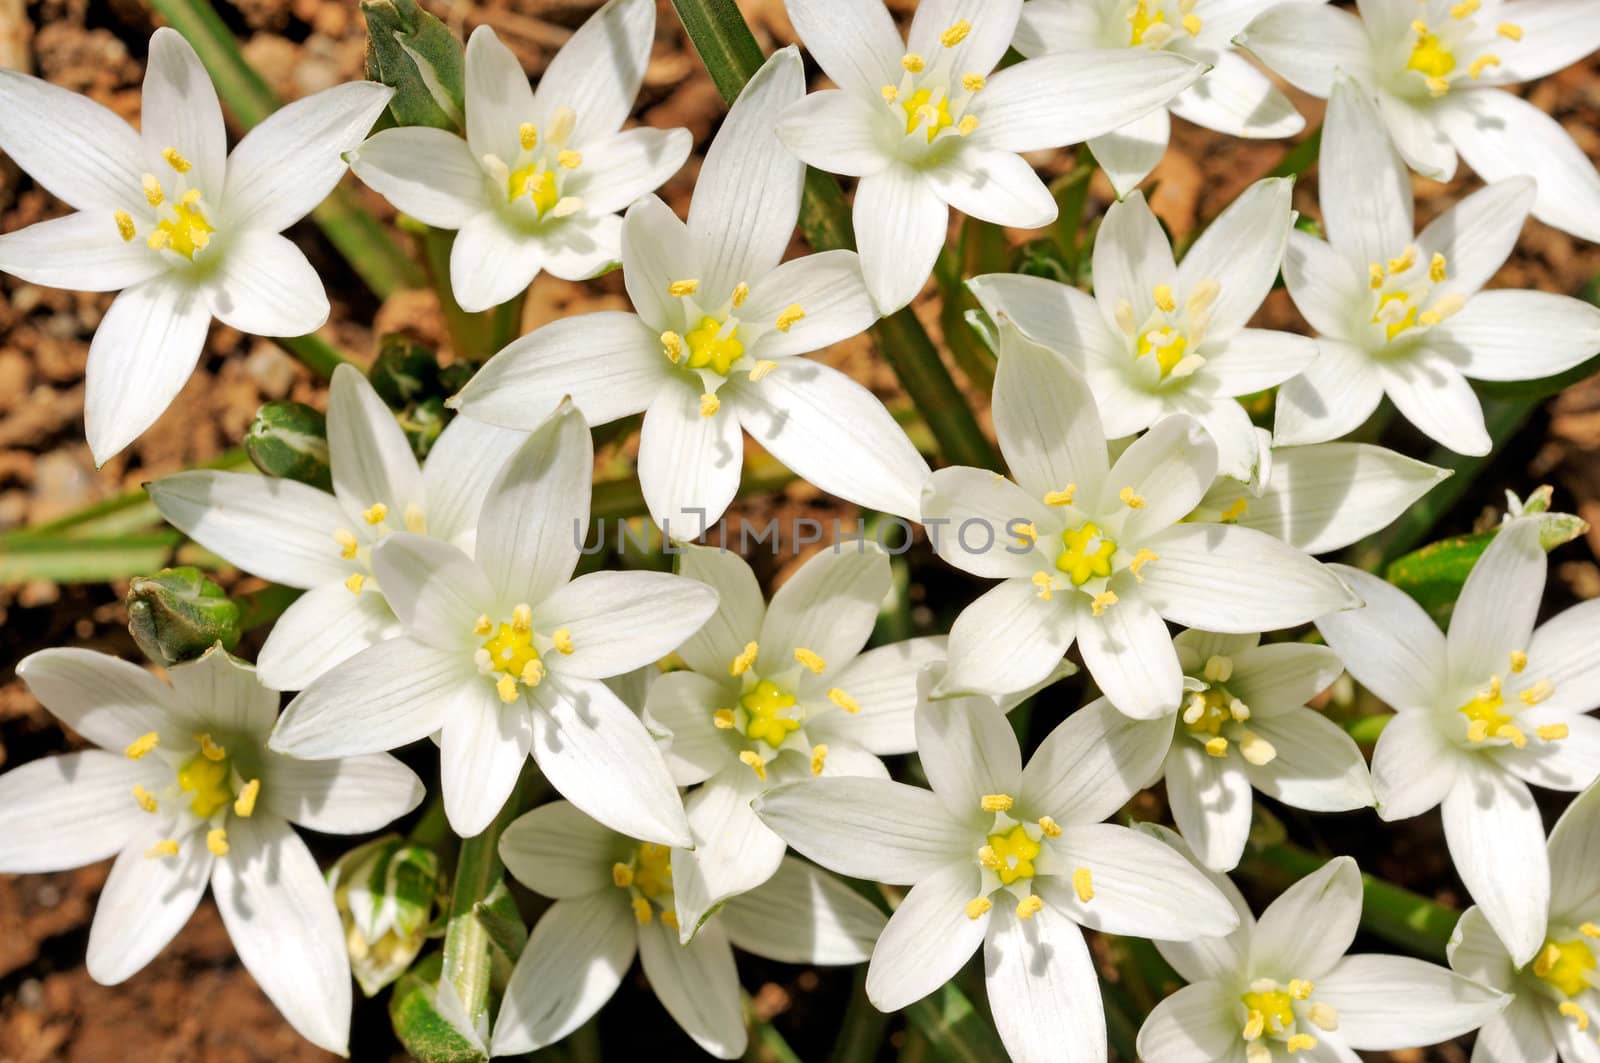 Spring flowers in the forest - glory-of-the-snow (Chionodoxa luciliae)